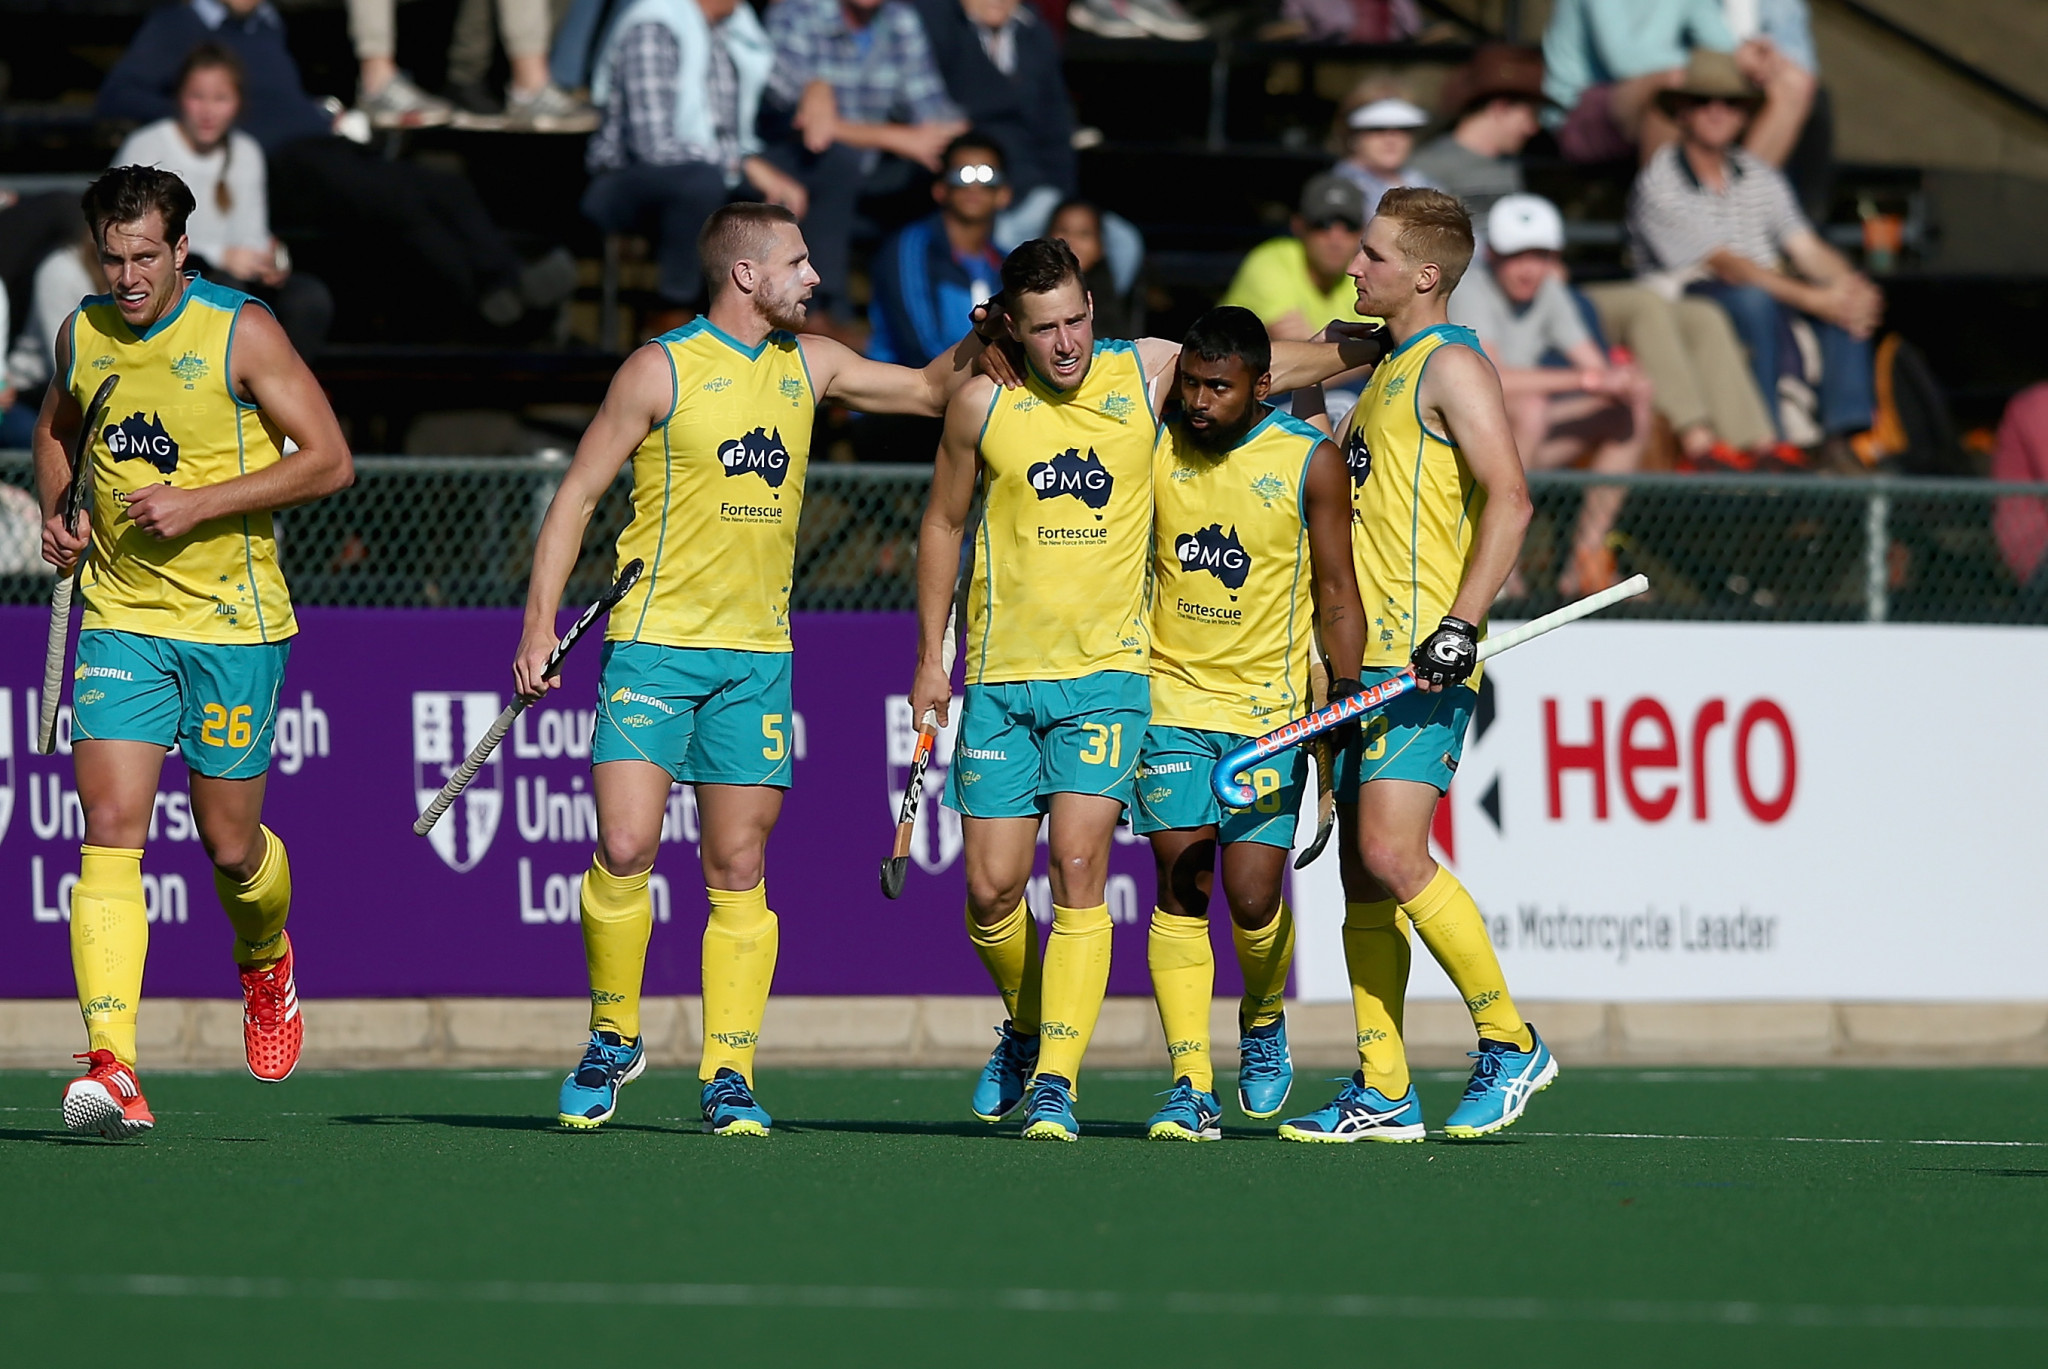 Australia come into the event hoping to retain their Hockey World League title ©Getty Images